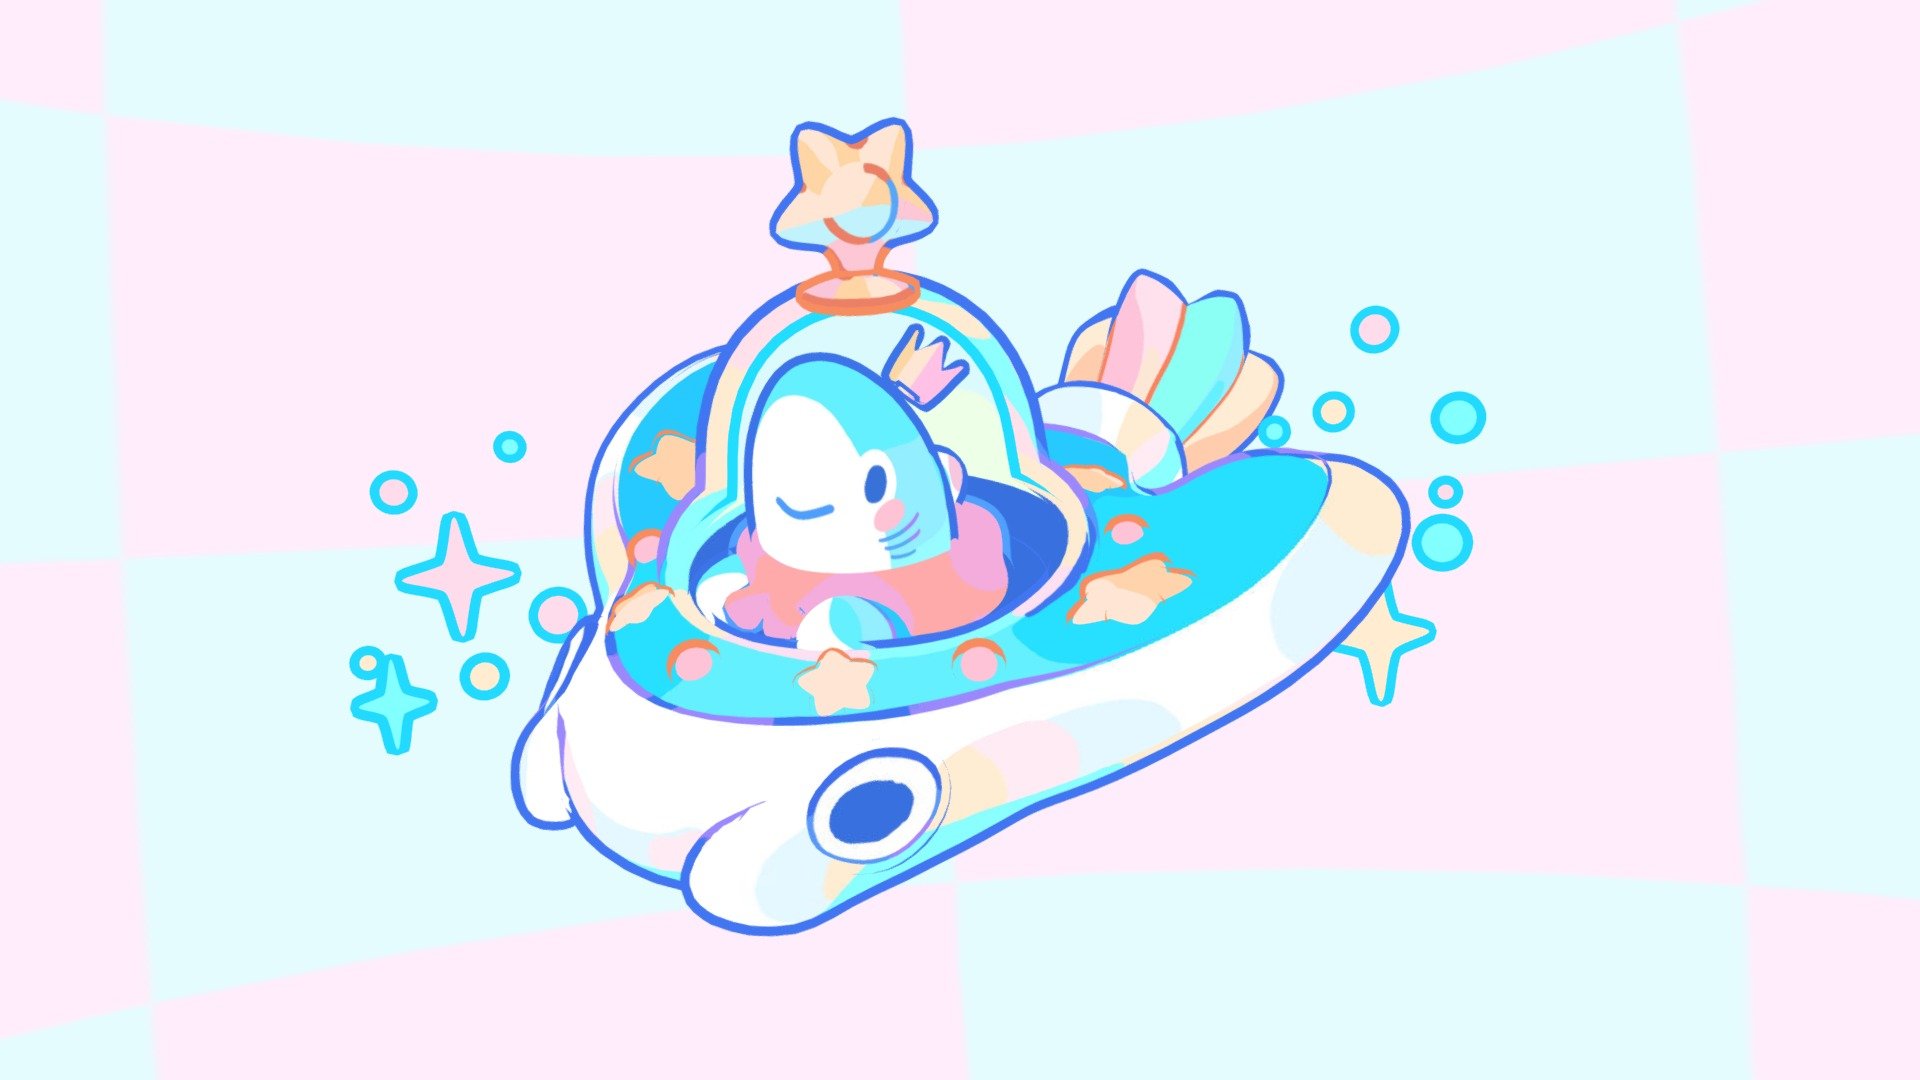 A cute shark prince soaring through the galaxy~ 💫🦈

• Thank you to Requinoesis for permitting the adapatation of their illustration into 3D! This was a wonderful design to work with

• Original Concept: https://twitter.com/Requinoesis/status/1703021338829496565

• Modelled, rigged, and animated in Maya, textured in Substance Painter - 💫 Little Shark Prince 🦈 - 3D model by x0ru 3d model